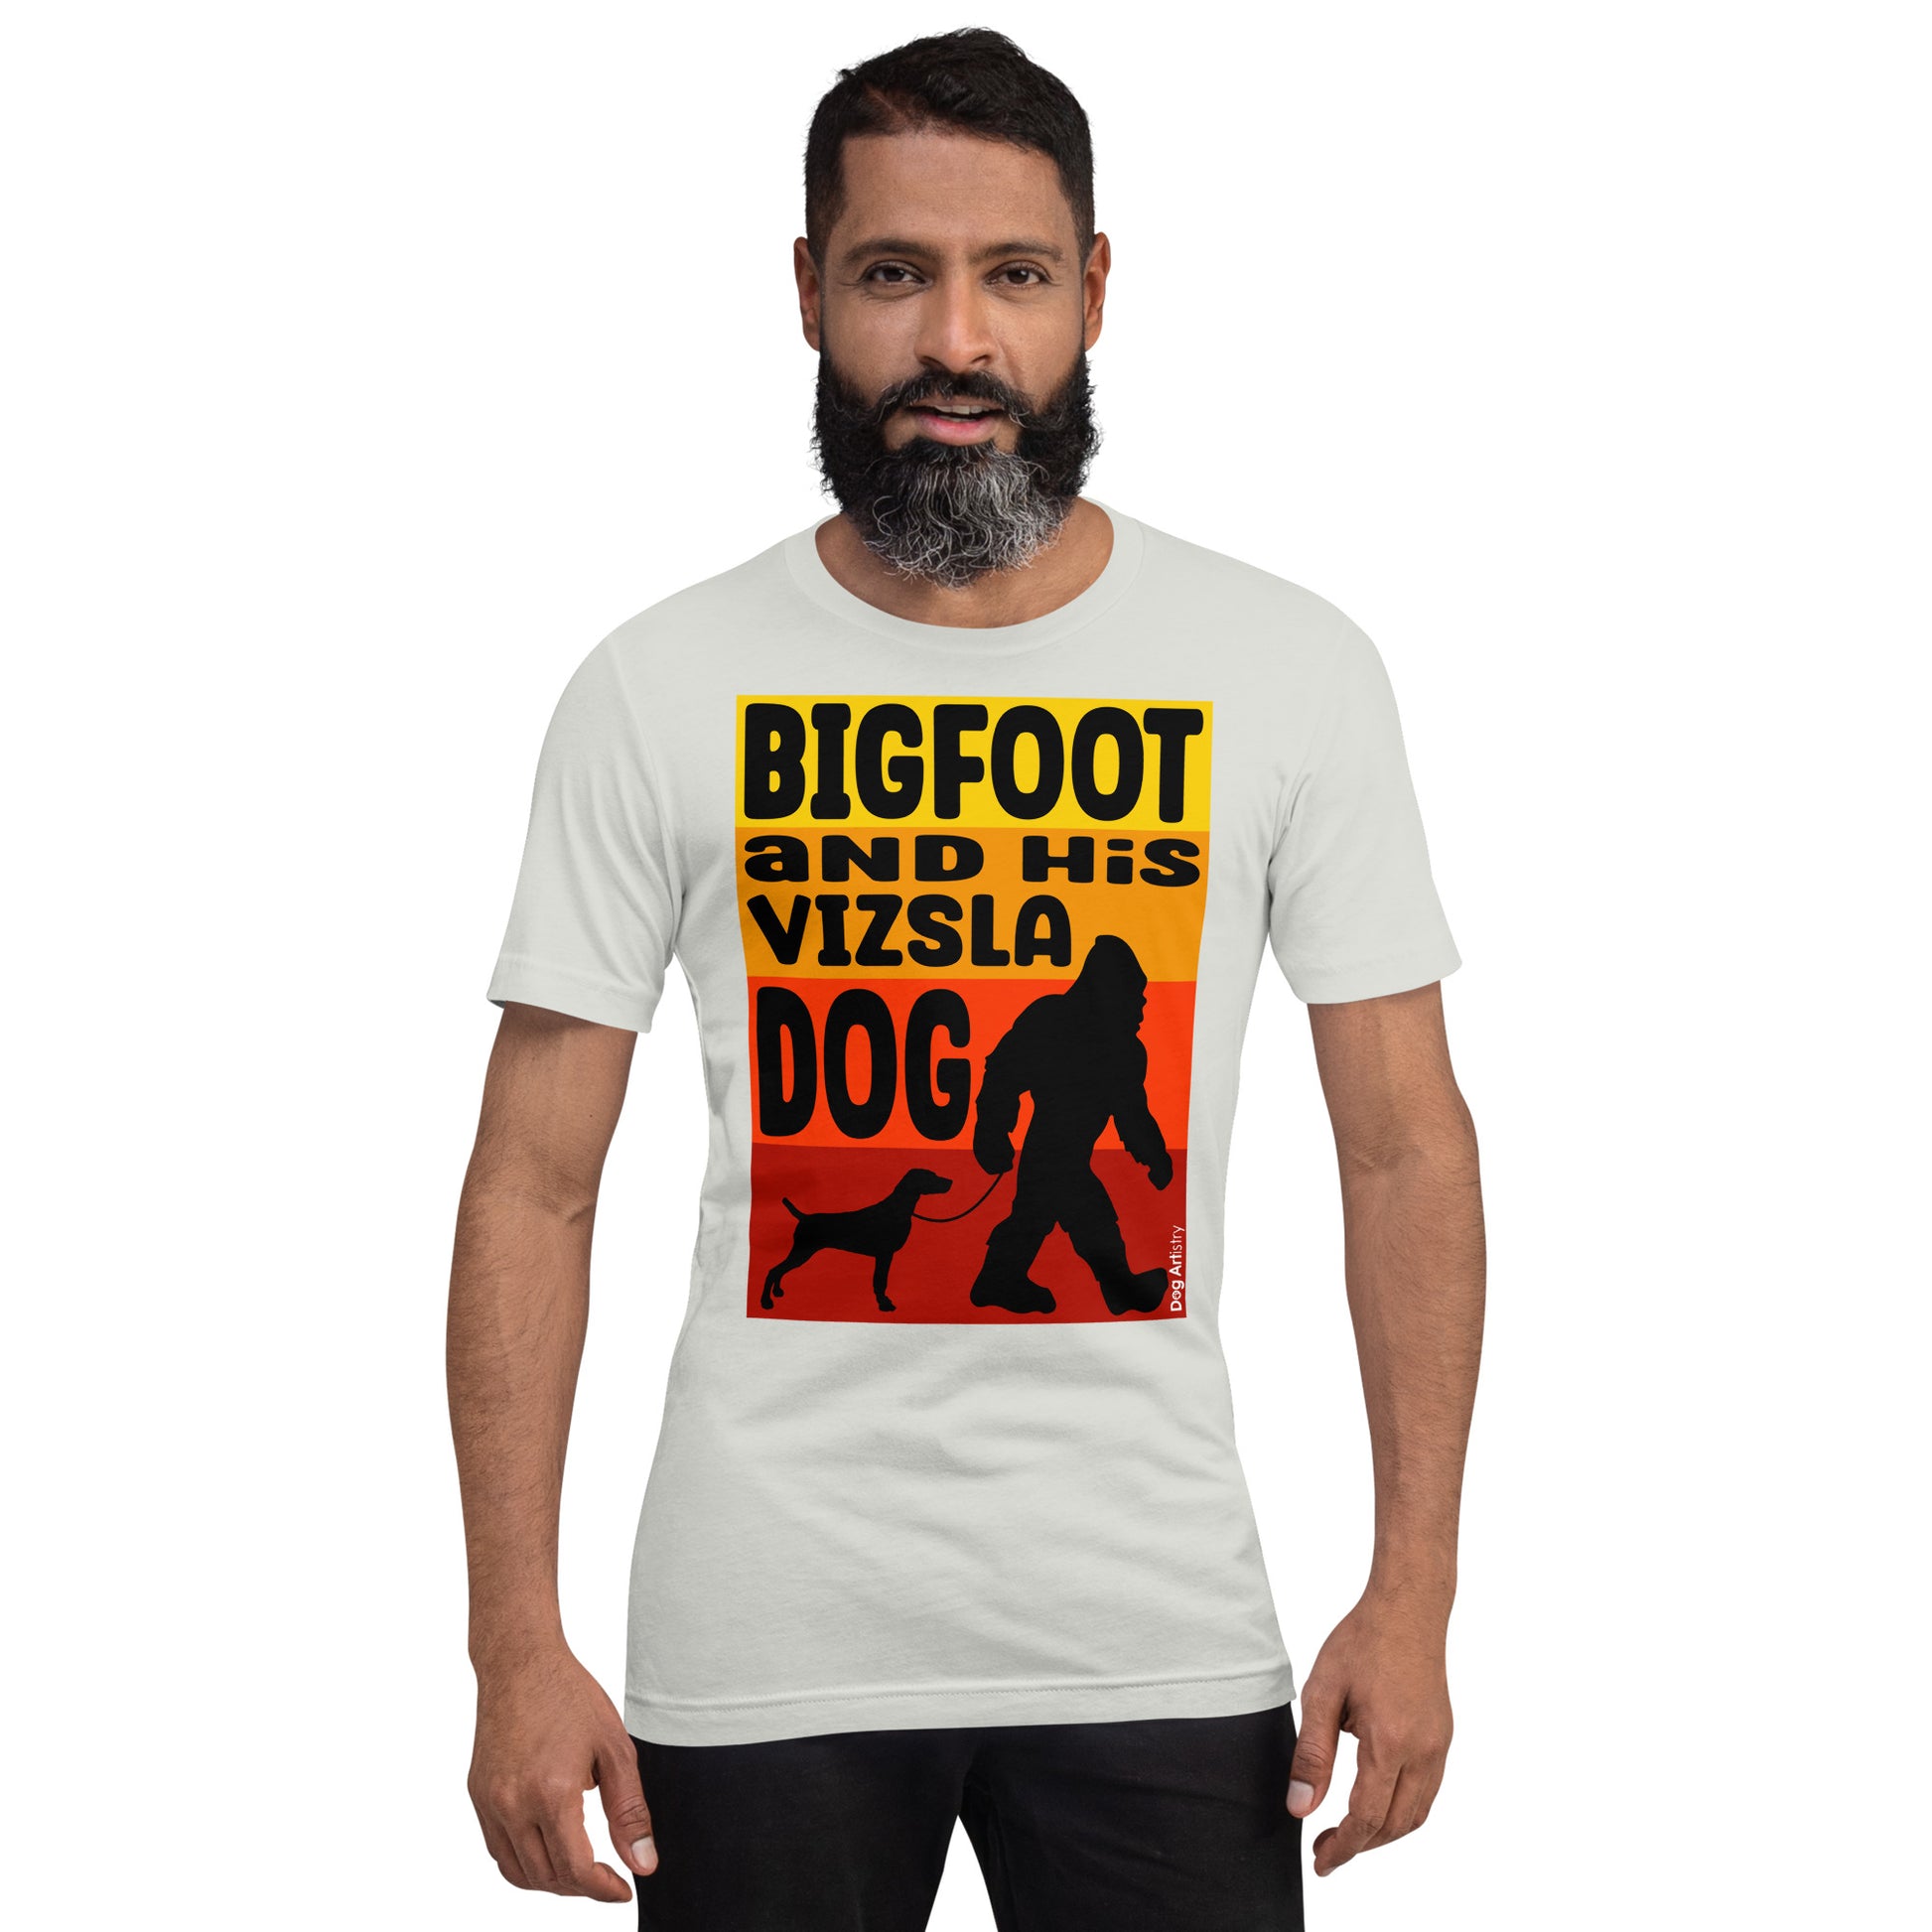 Bigfoot and his Vizsla dog unisex silver t-shirt by Dog Artistry.